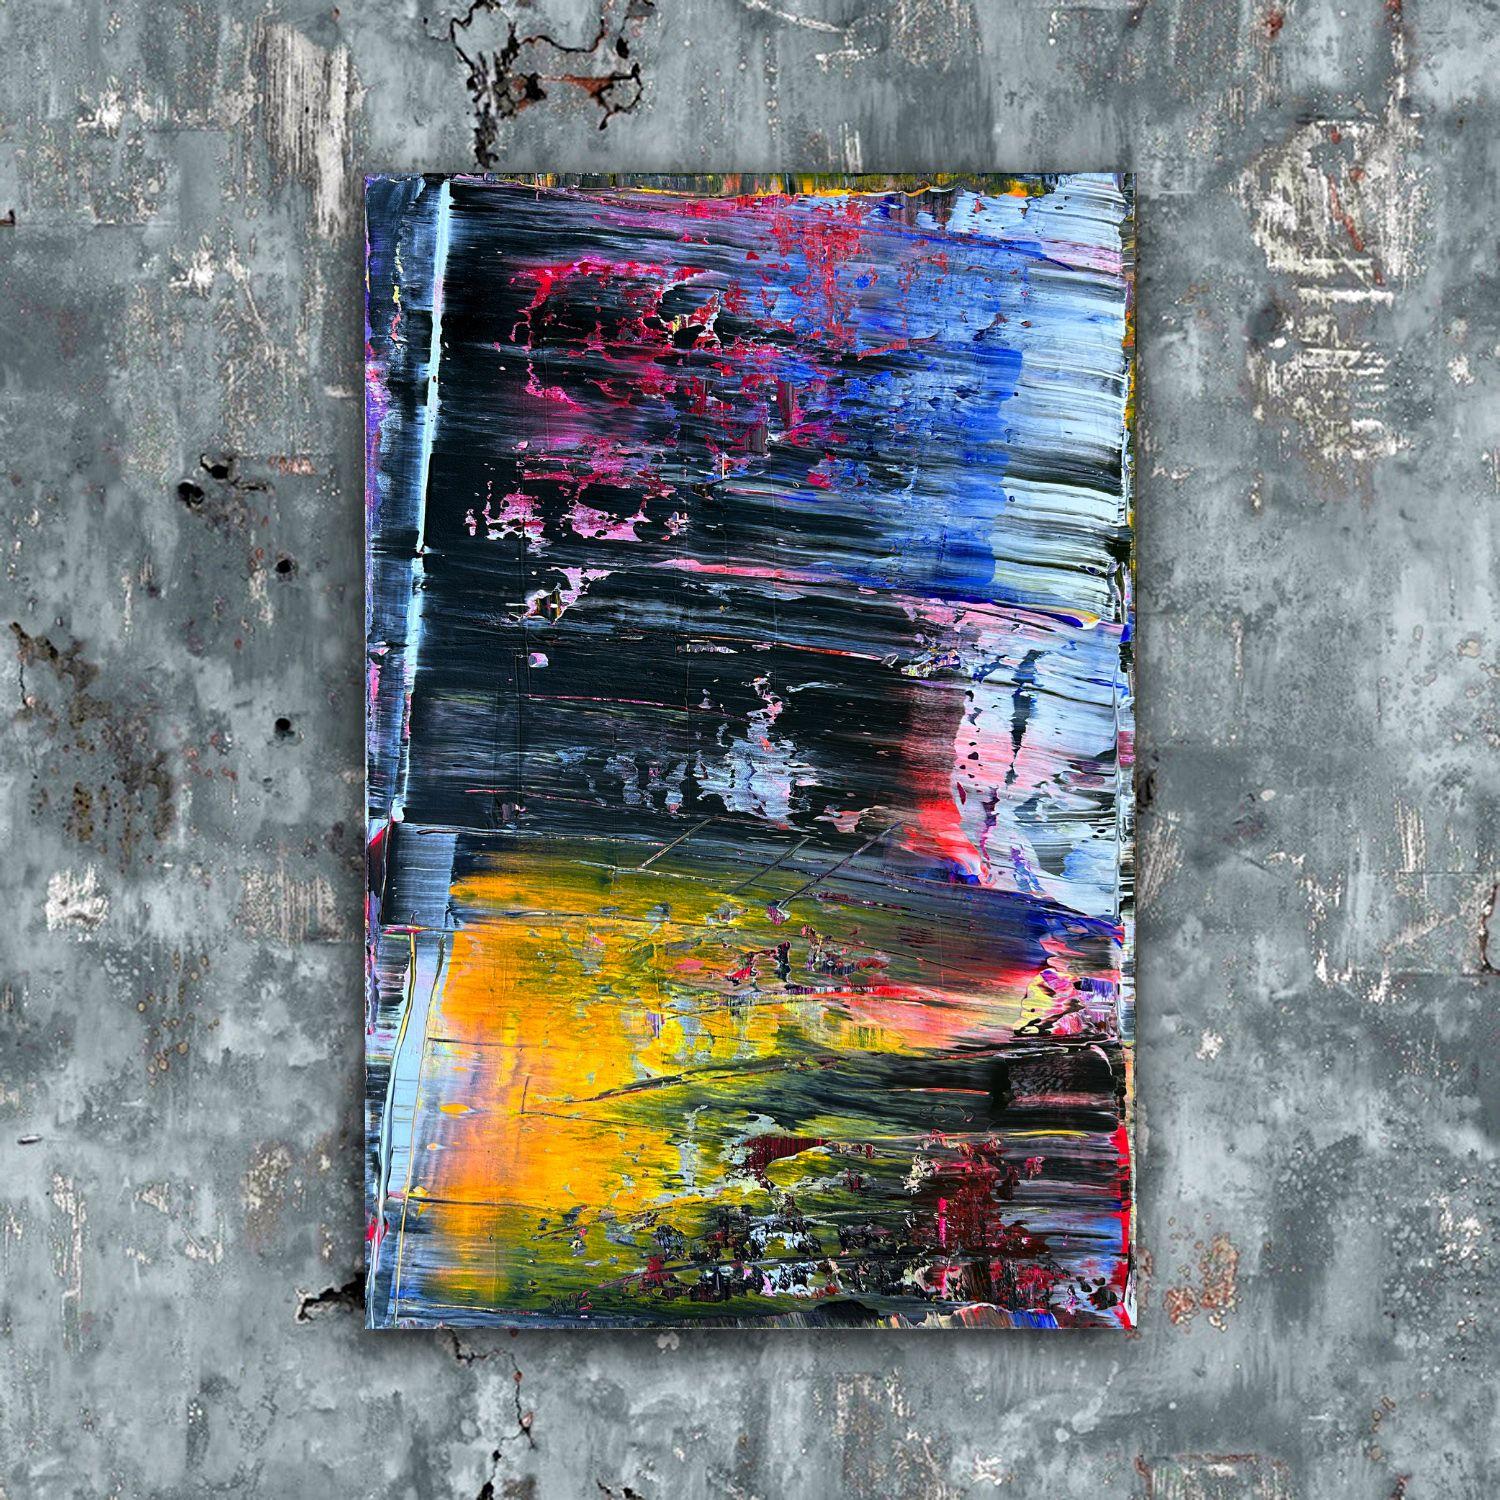 This is a unique modern PMS abstract acrylic painting that will make a statement in your home or office. This piece has a mature and dark neutral modern design aesthetic. This painting is full of energy, intensity and a strong balance of light and